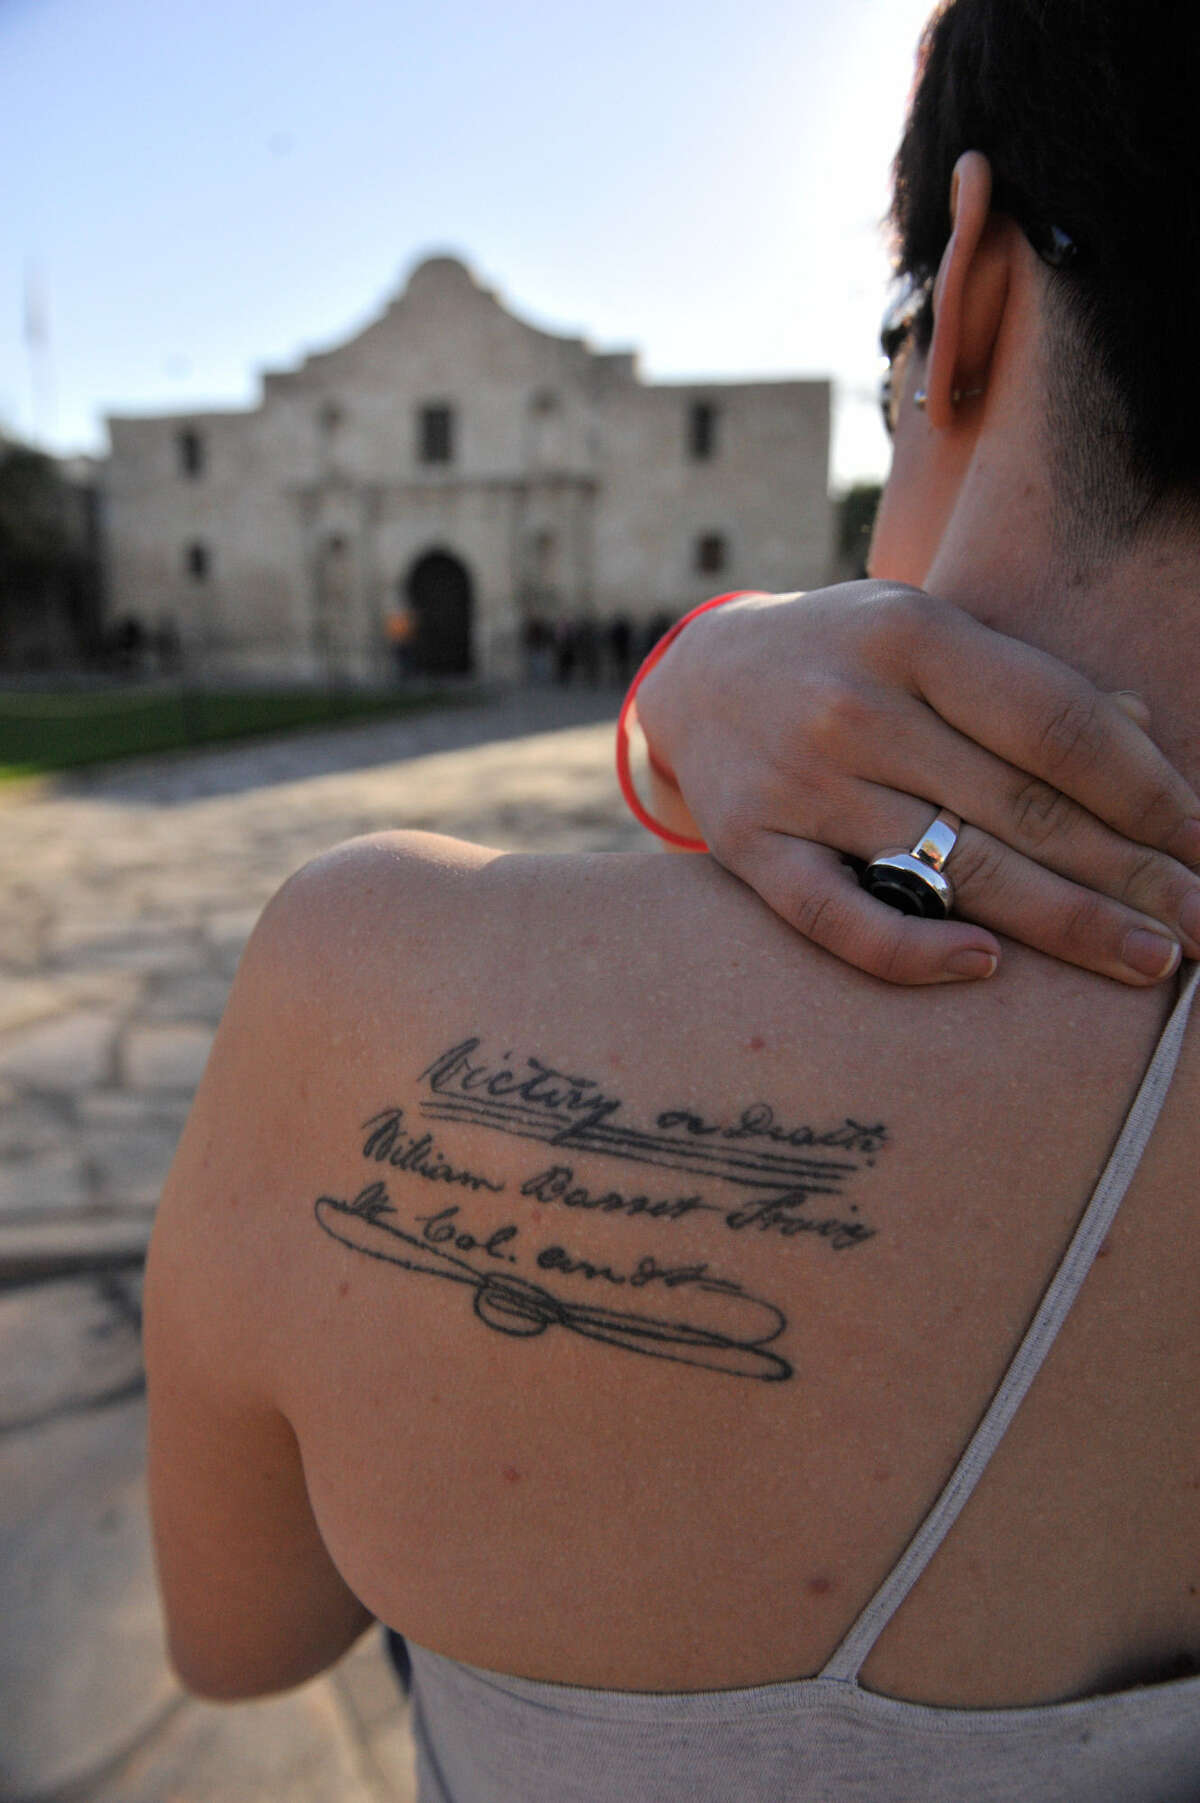 Sarah Martin, 22, of Arlington has a replica of the “victory or death” quote tattooed to her back. She was at the Alamo on Friday.